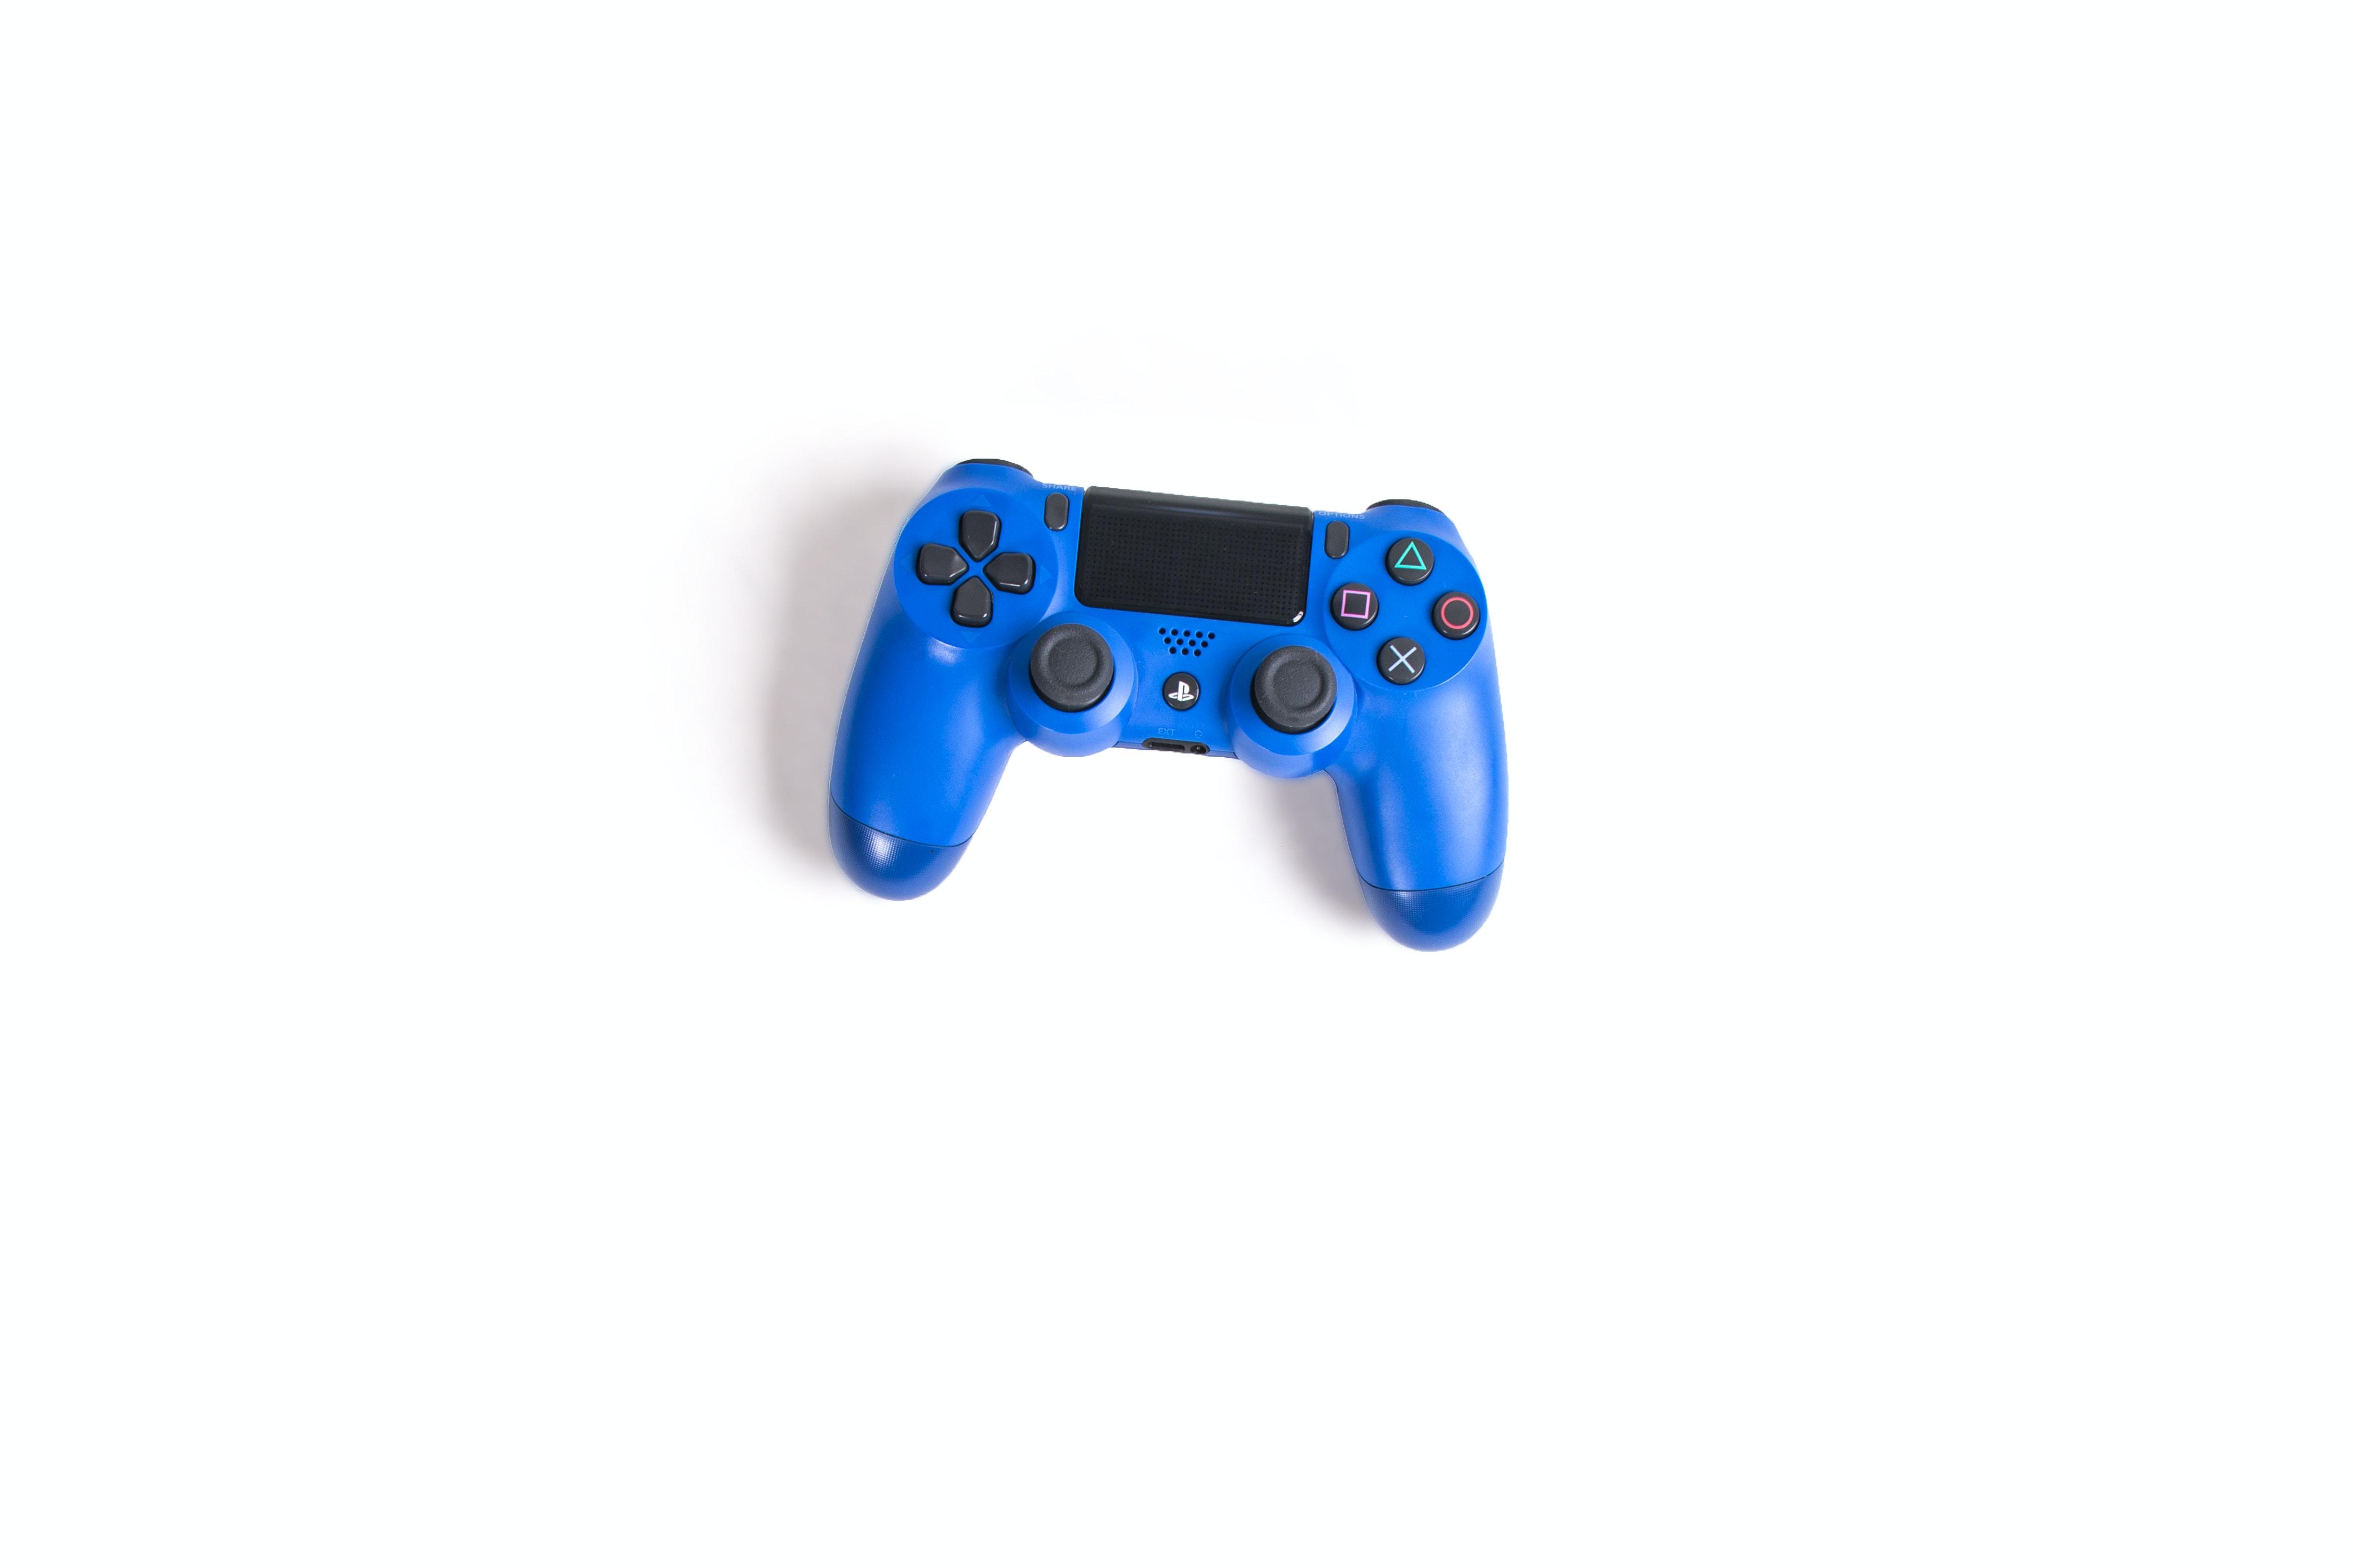 Why does the PS4 controller cost so much?